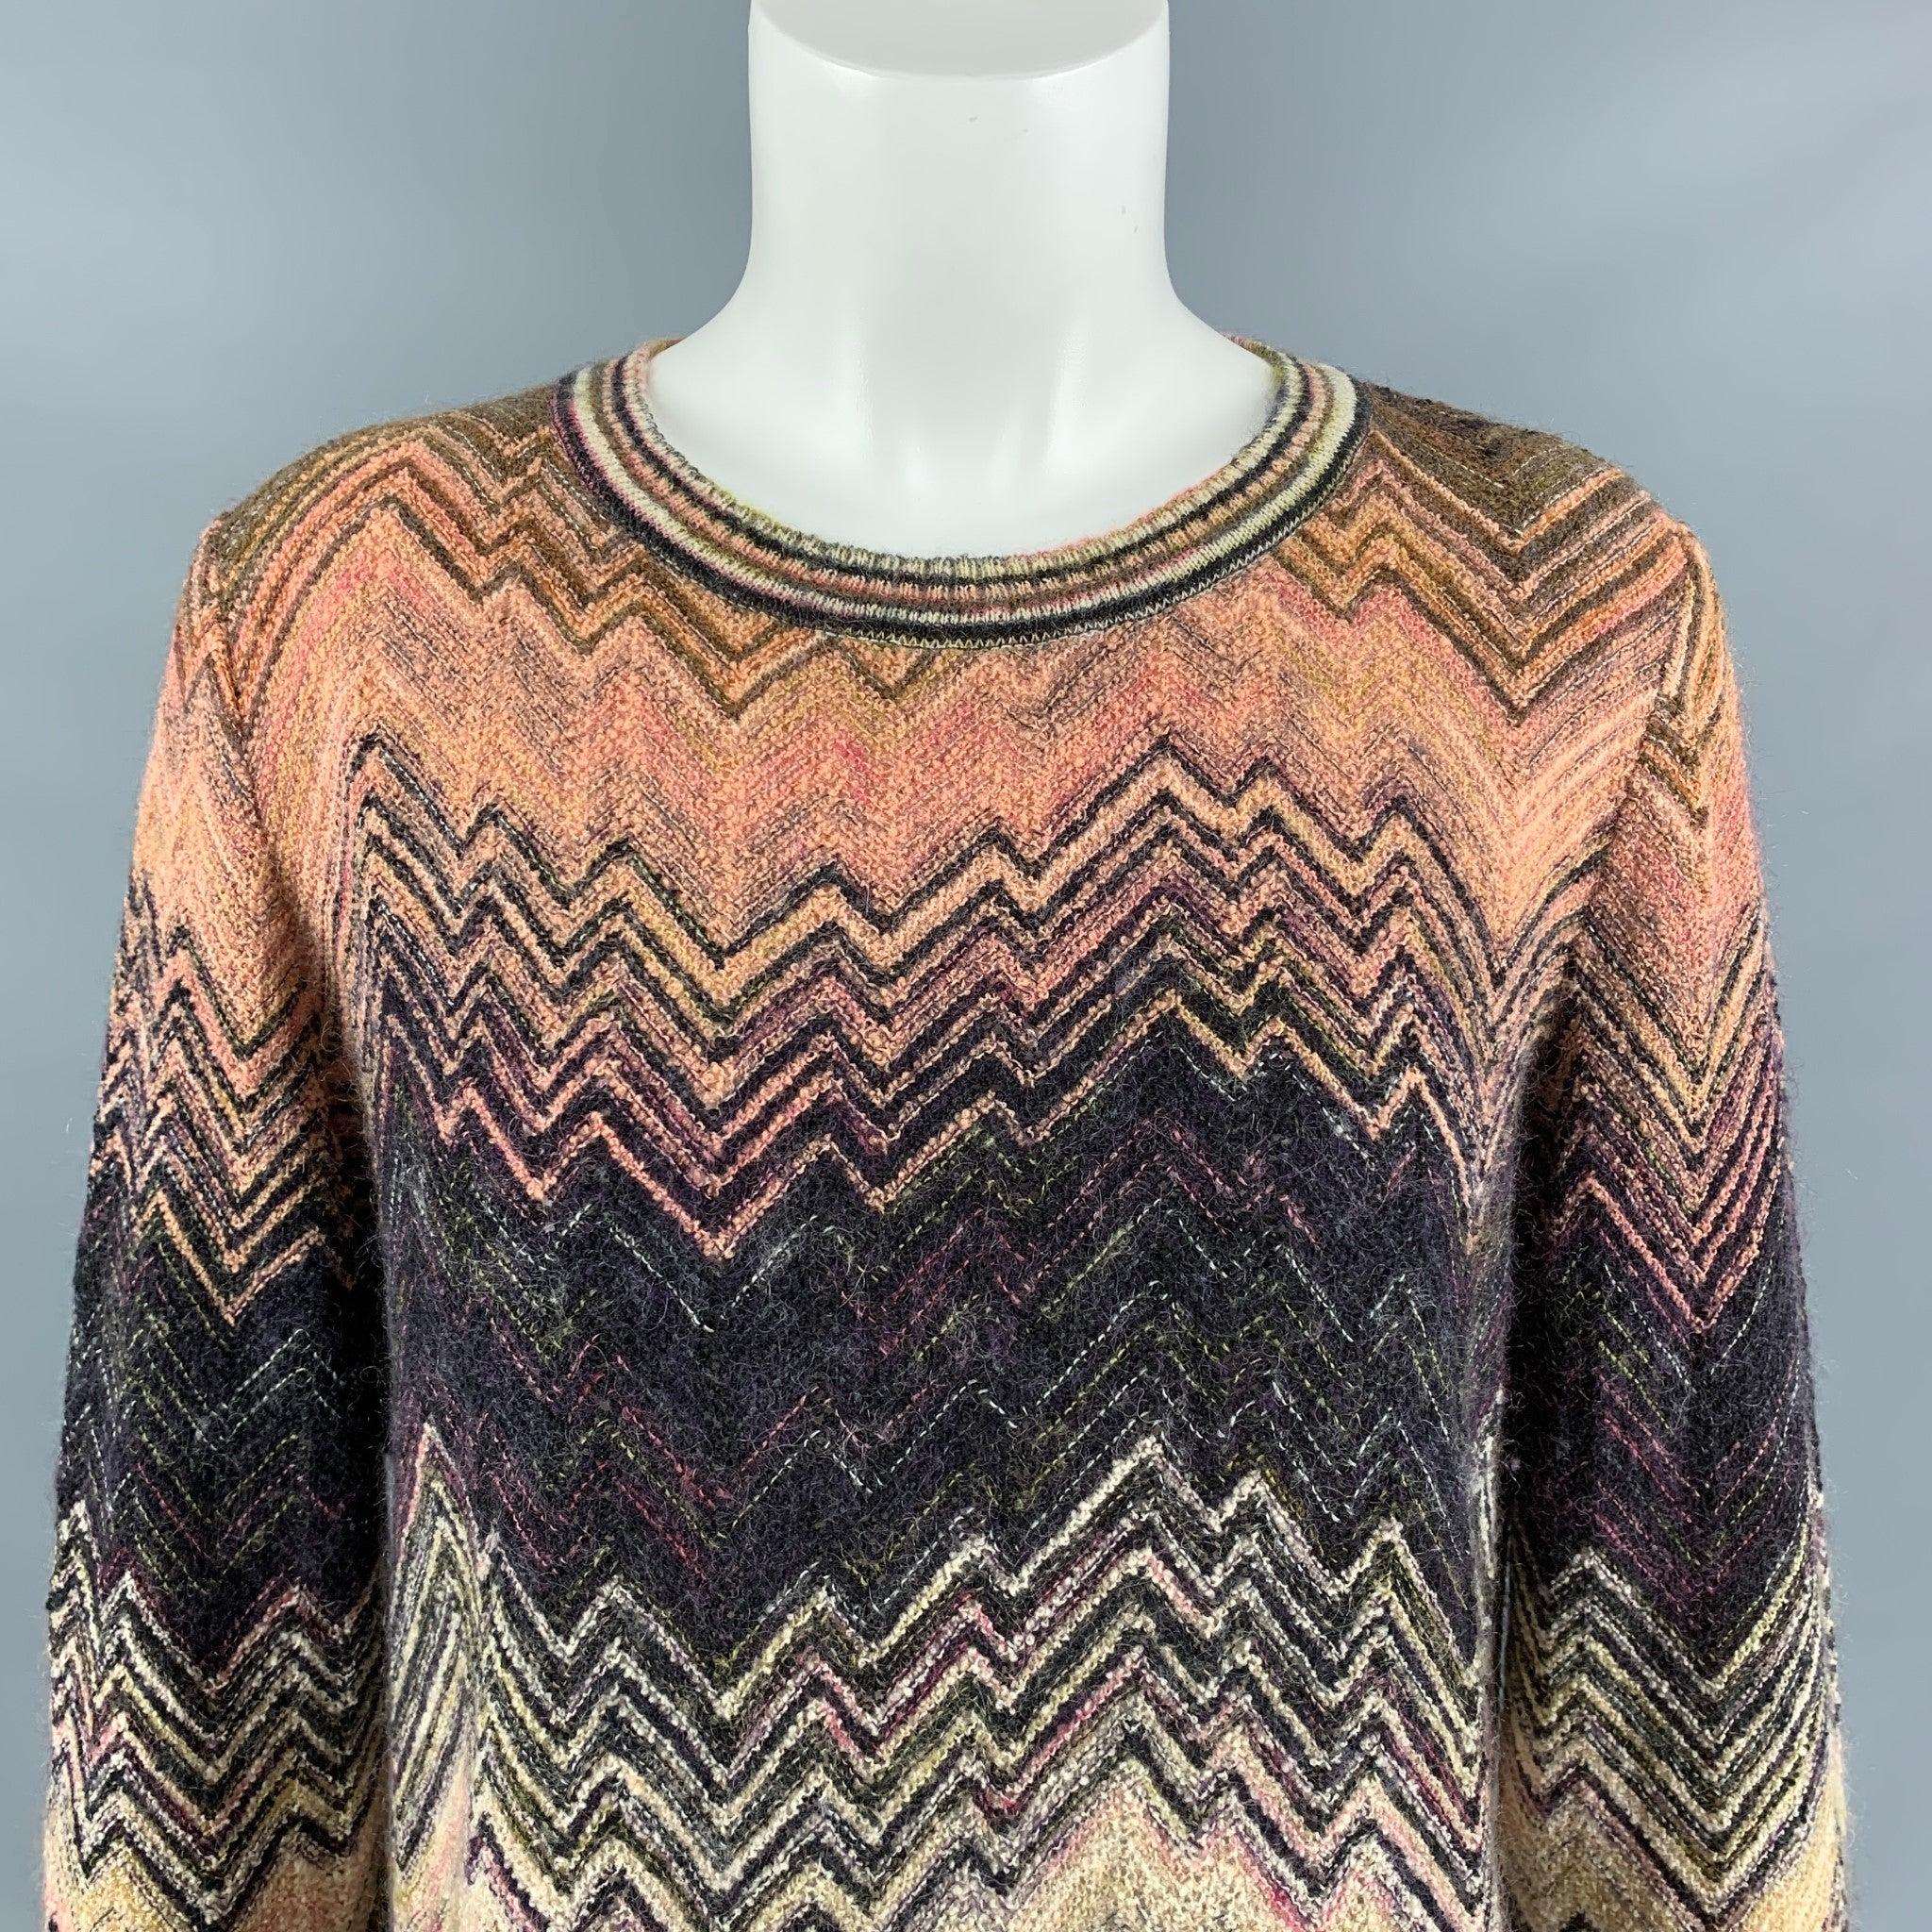 MISSONI sweater comes in a multi-color wool blend knitted featuring a zig zag pattern , round neckline, and fringe at bottom hem. Made in Italy. Excellent Pre-Owned Condition. Fabric tag removed. 

Marked:   46 

Measurements: 
 
Shoulder: 17